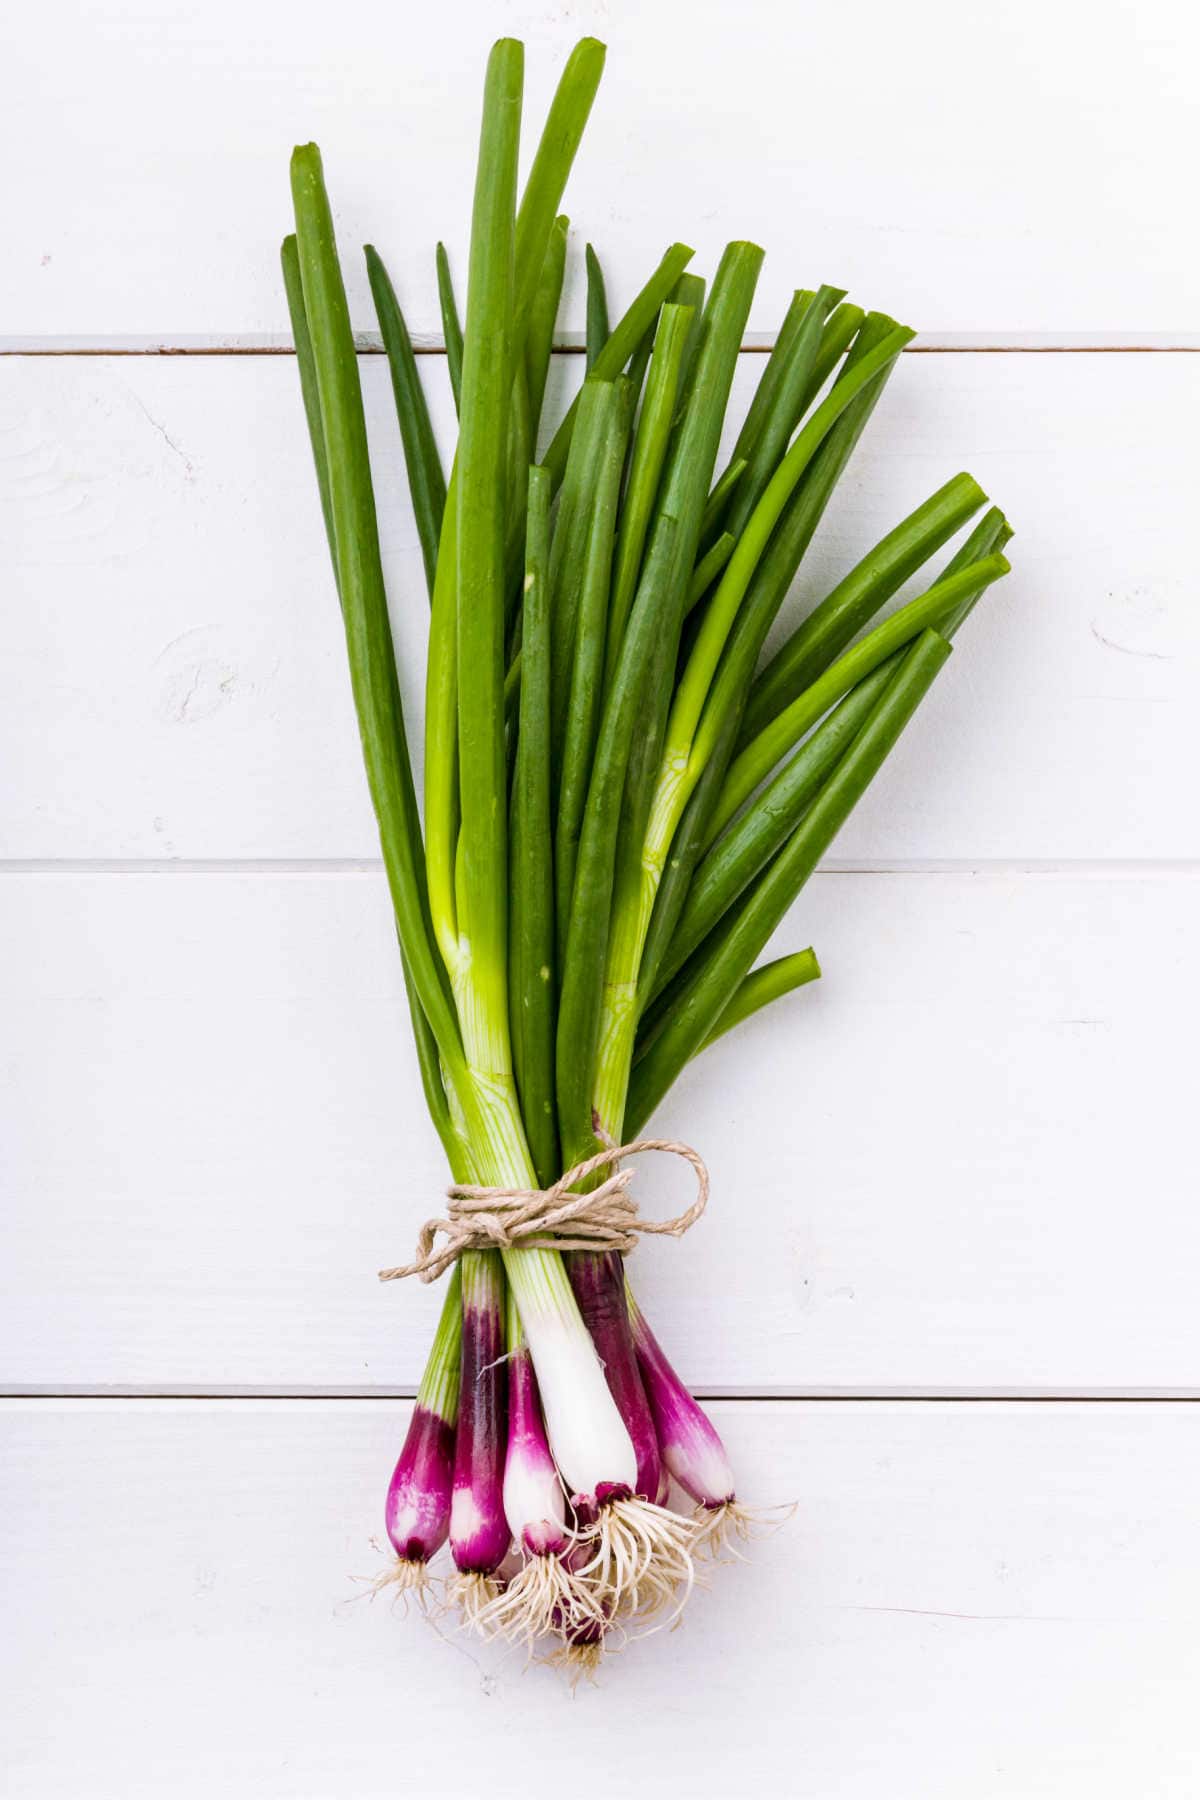 How to Store Spring Onions to Stay Fresher for Longer